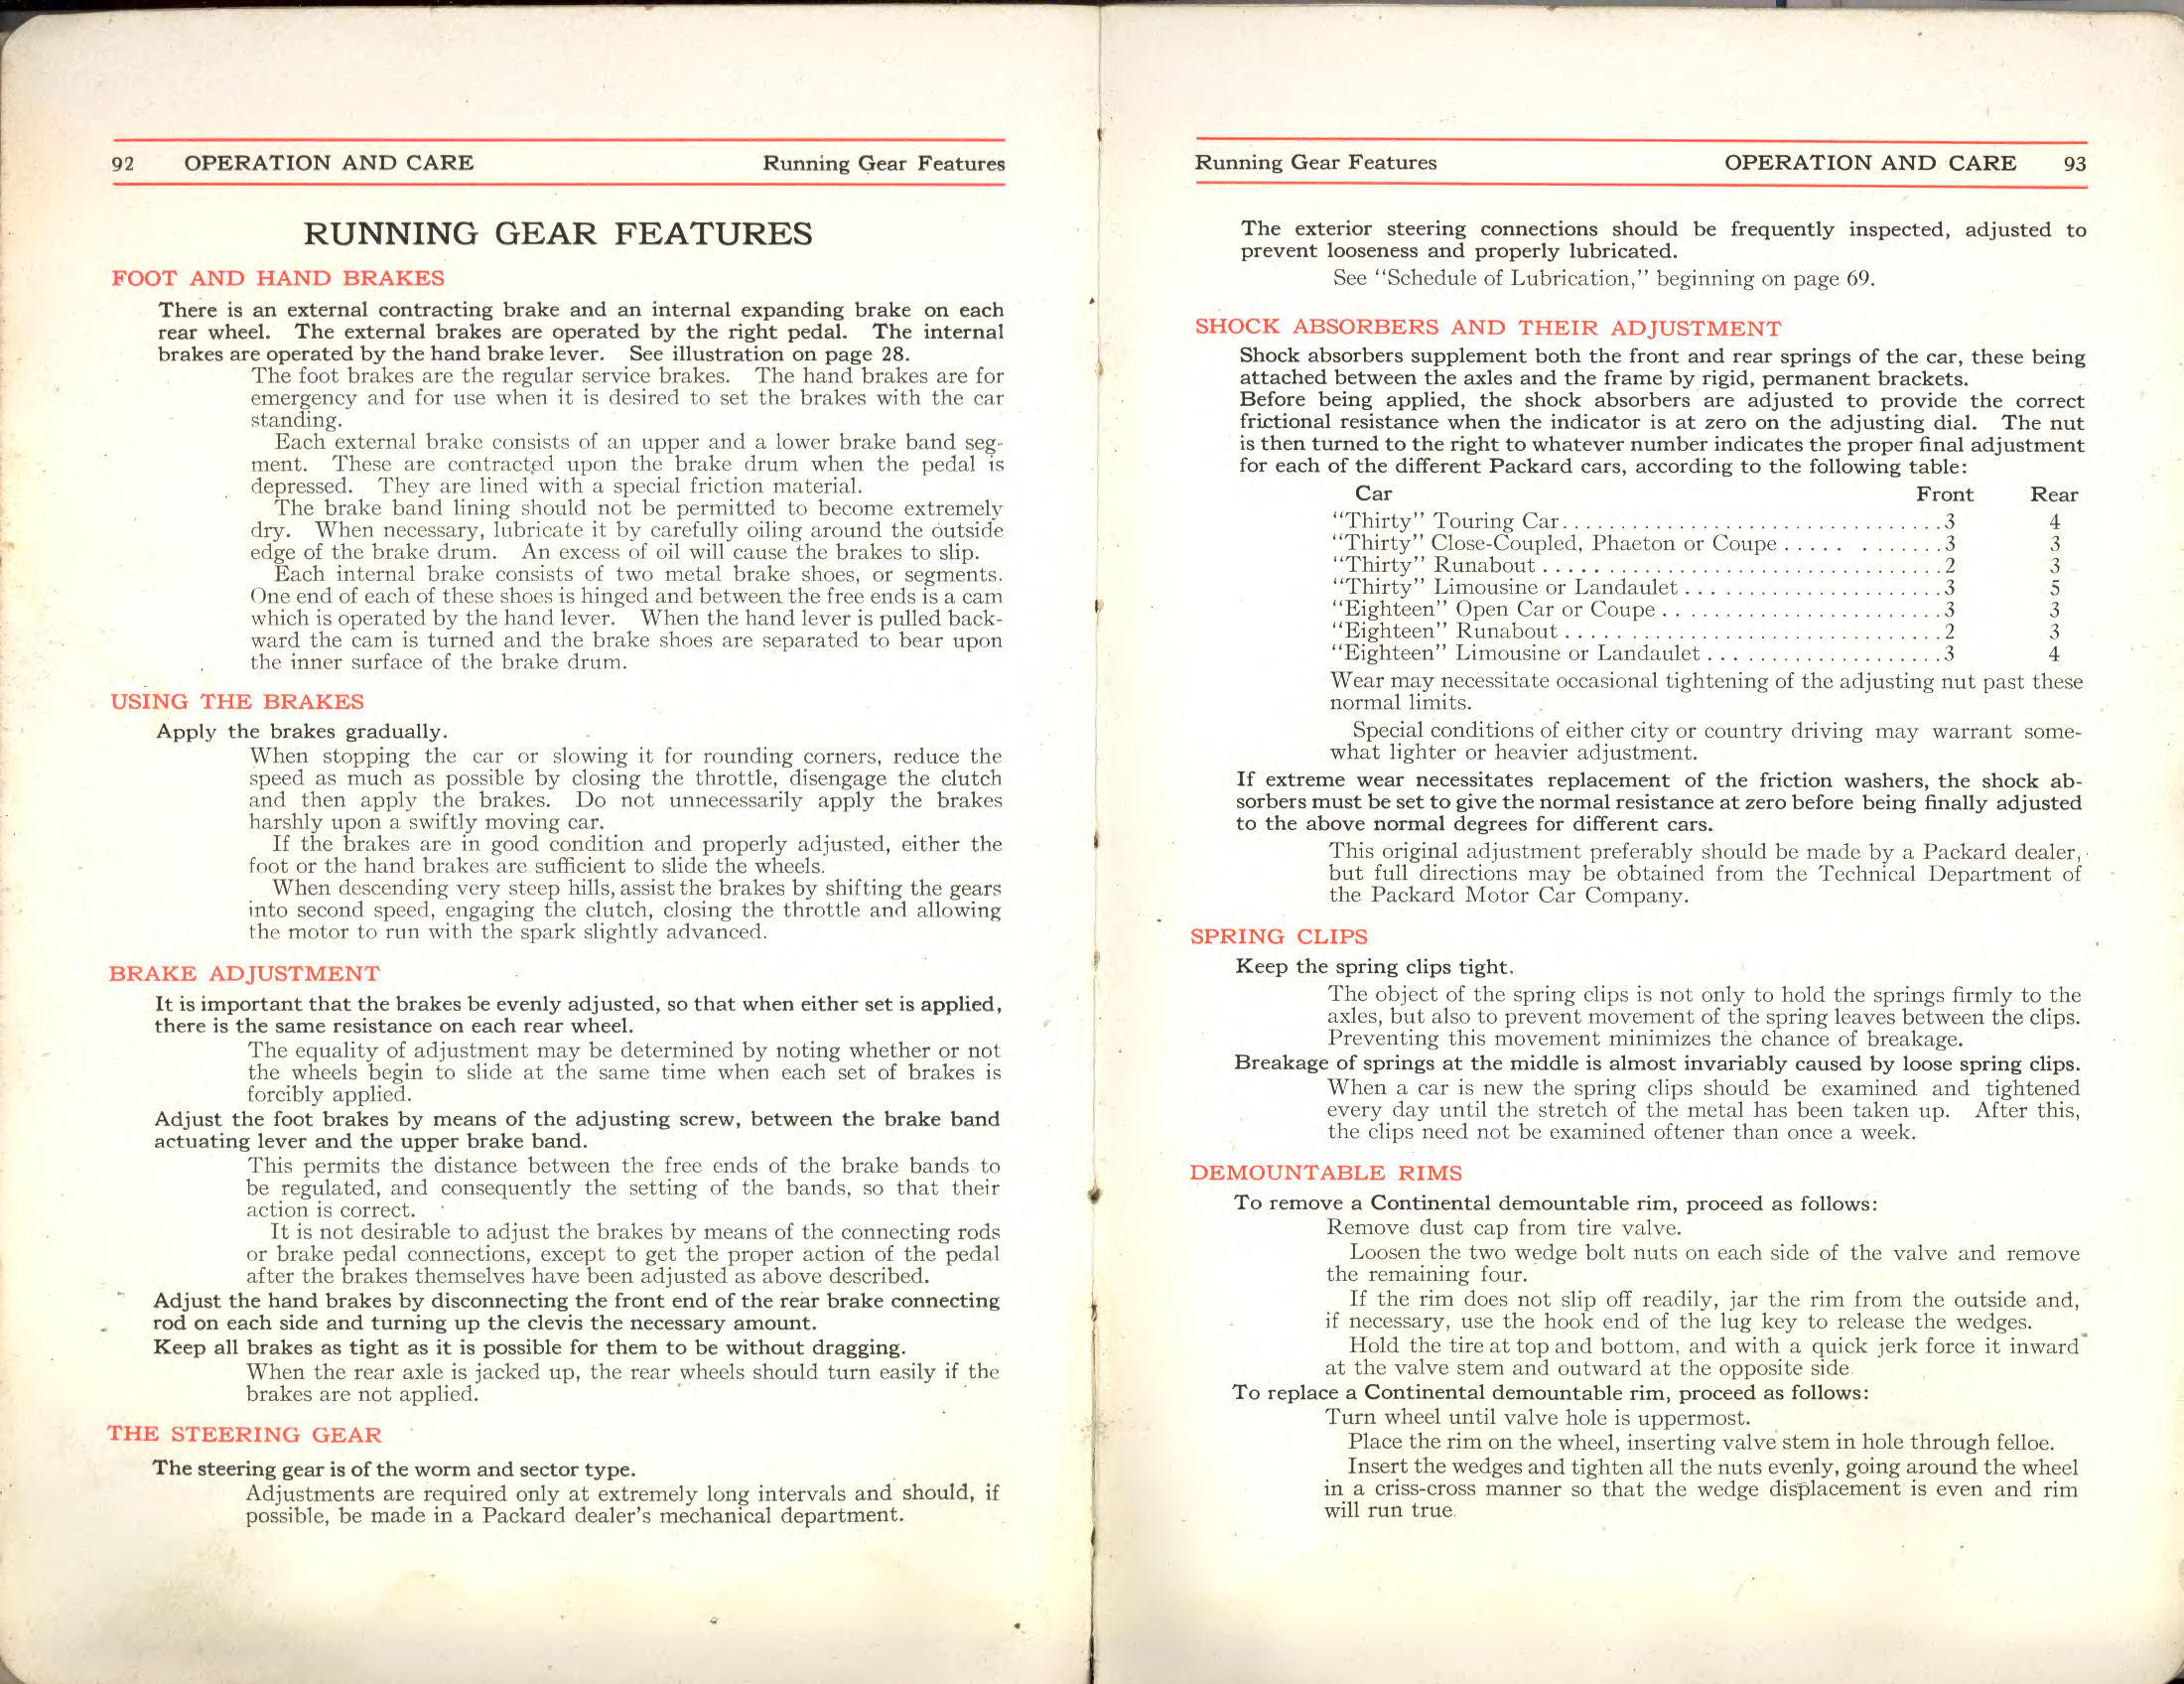 1911 Packard Owners Manual Page 7